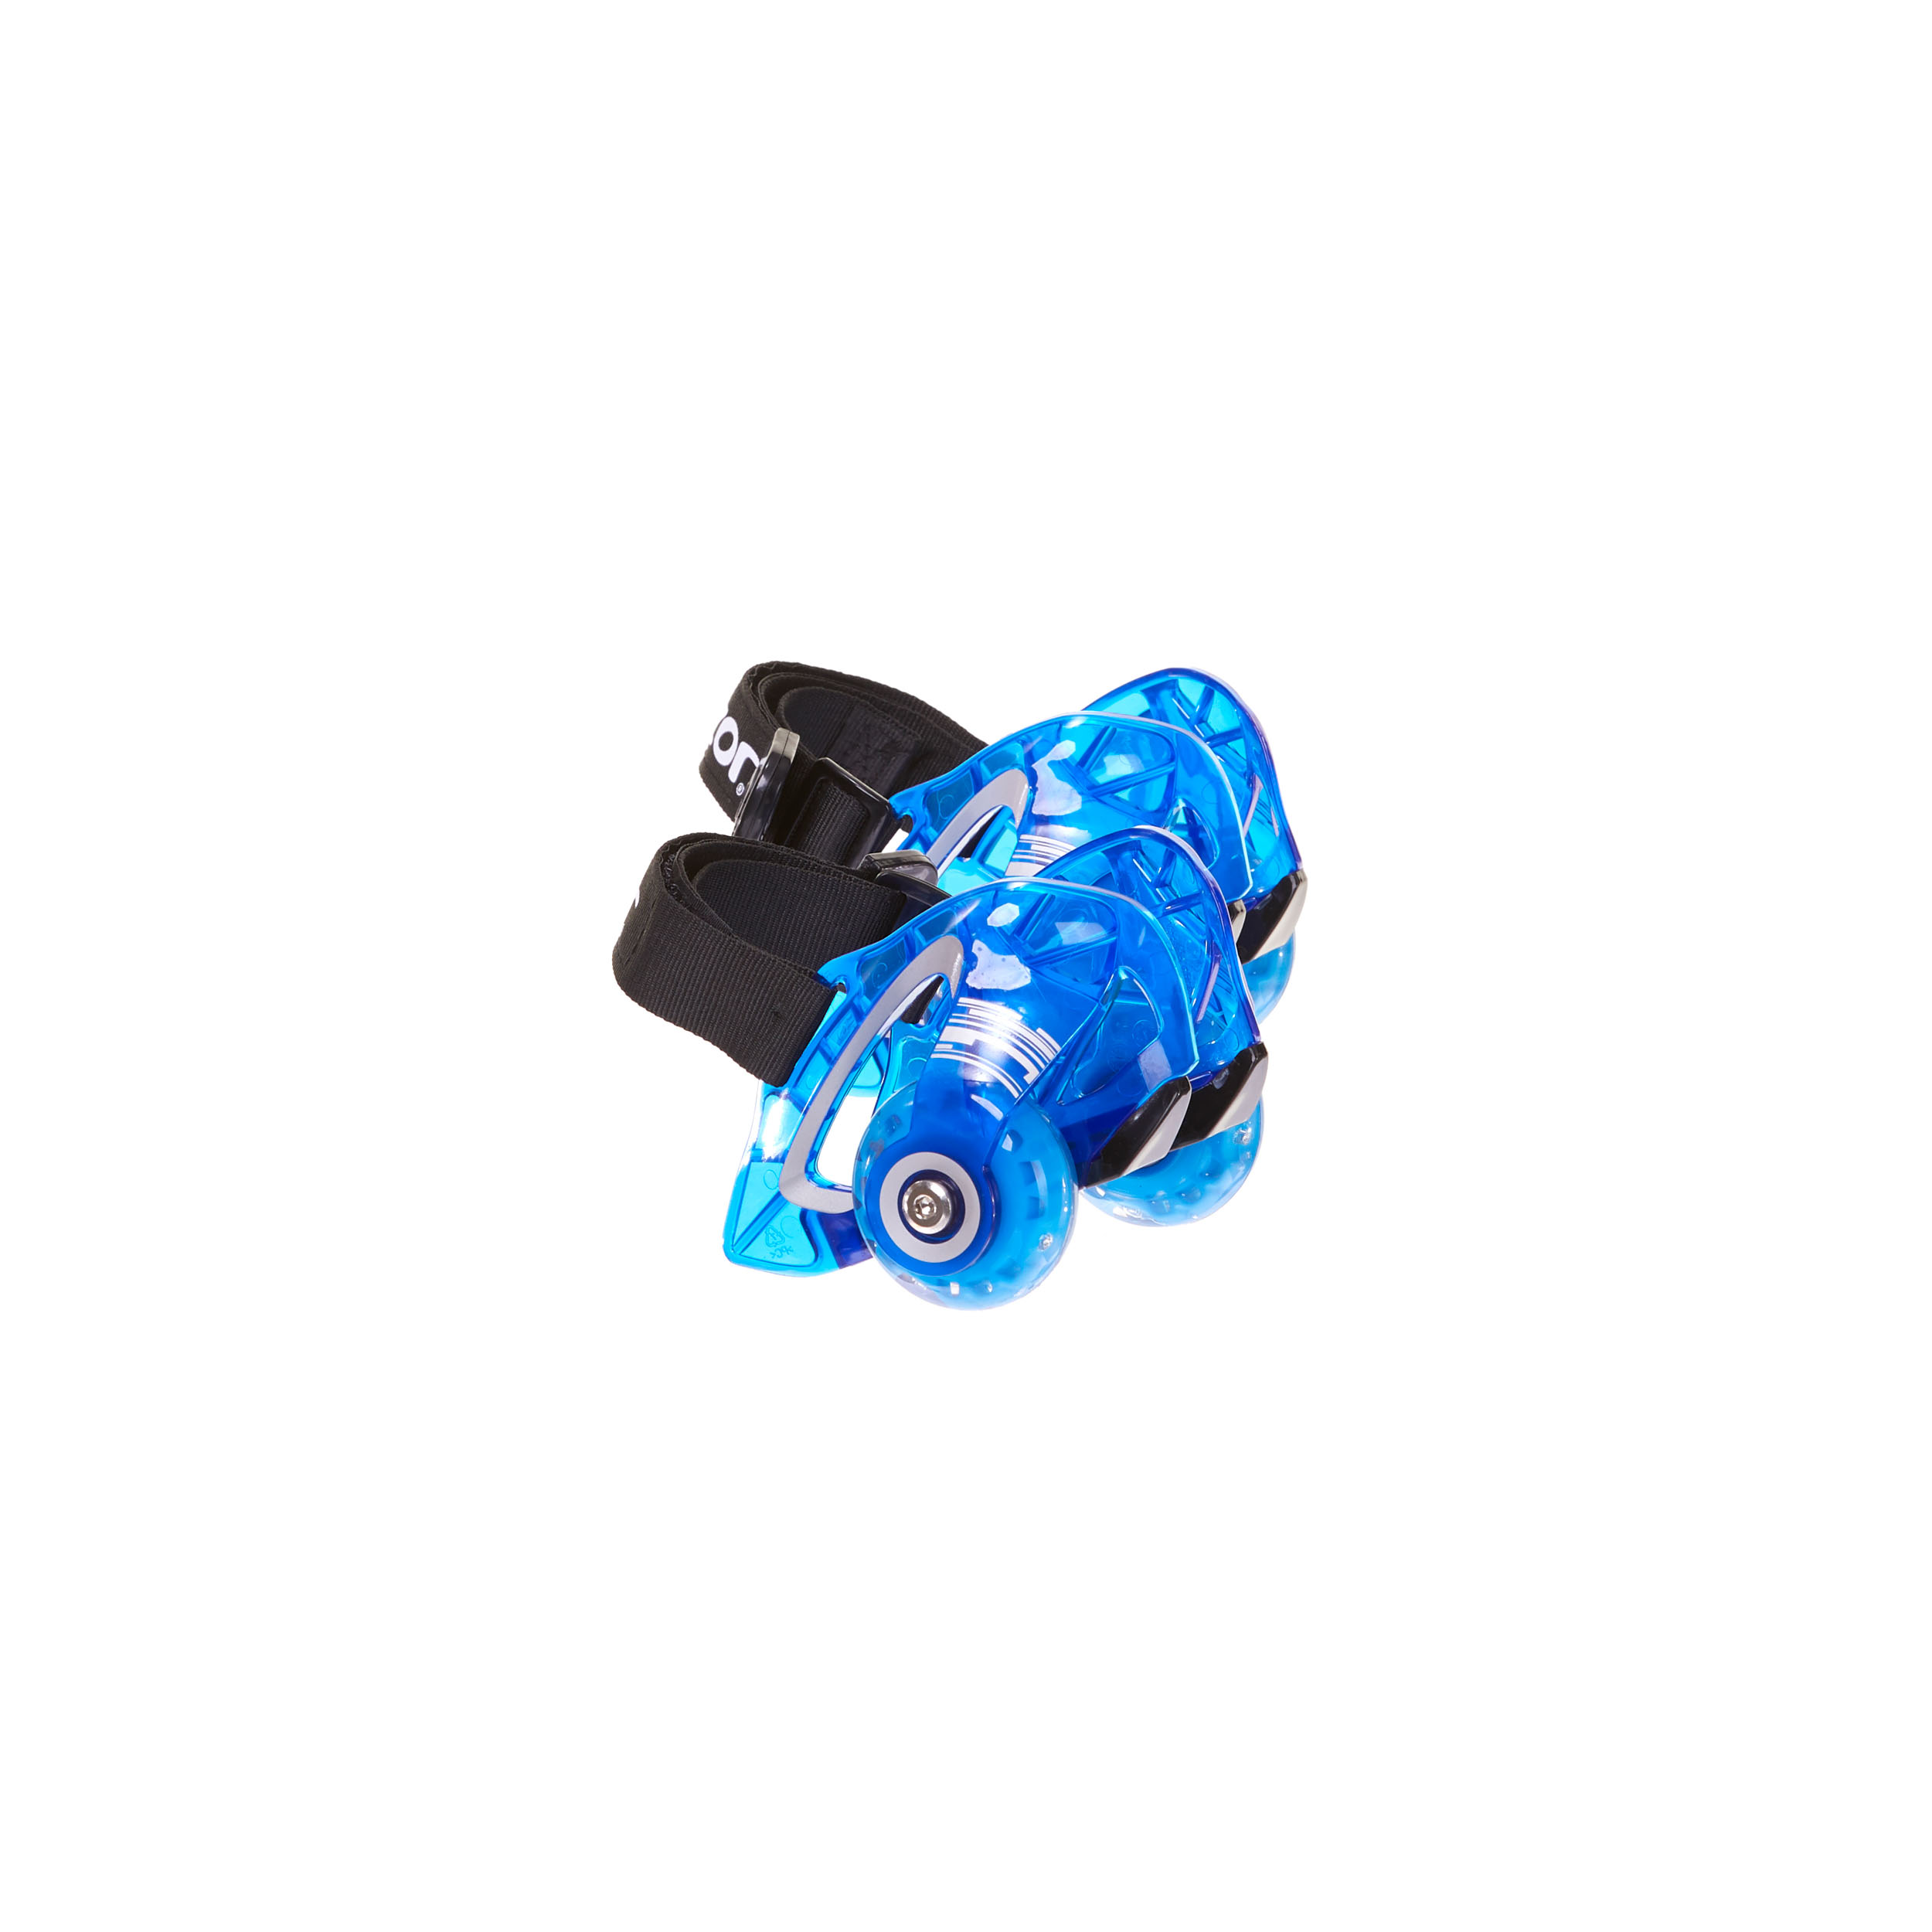 Razor Jetts DLX Heel Wheels - Blue, Wheeled Skate Shoes with Sparks for  Kids Ages 9+, Unisex 